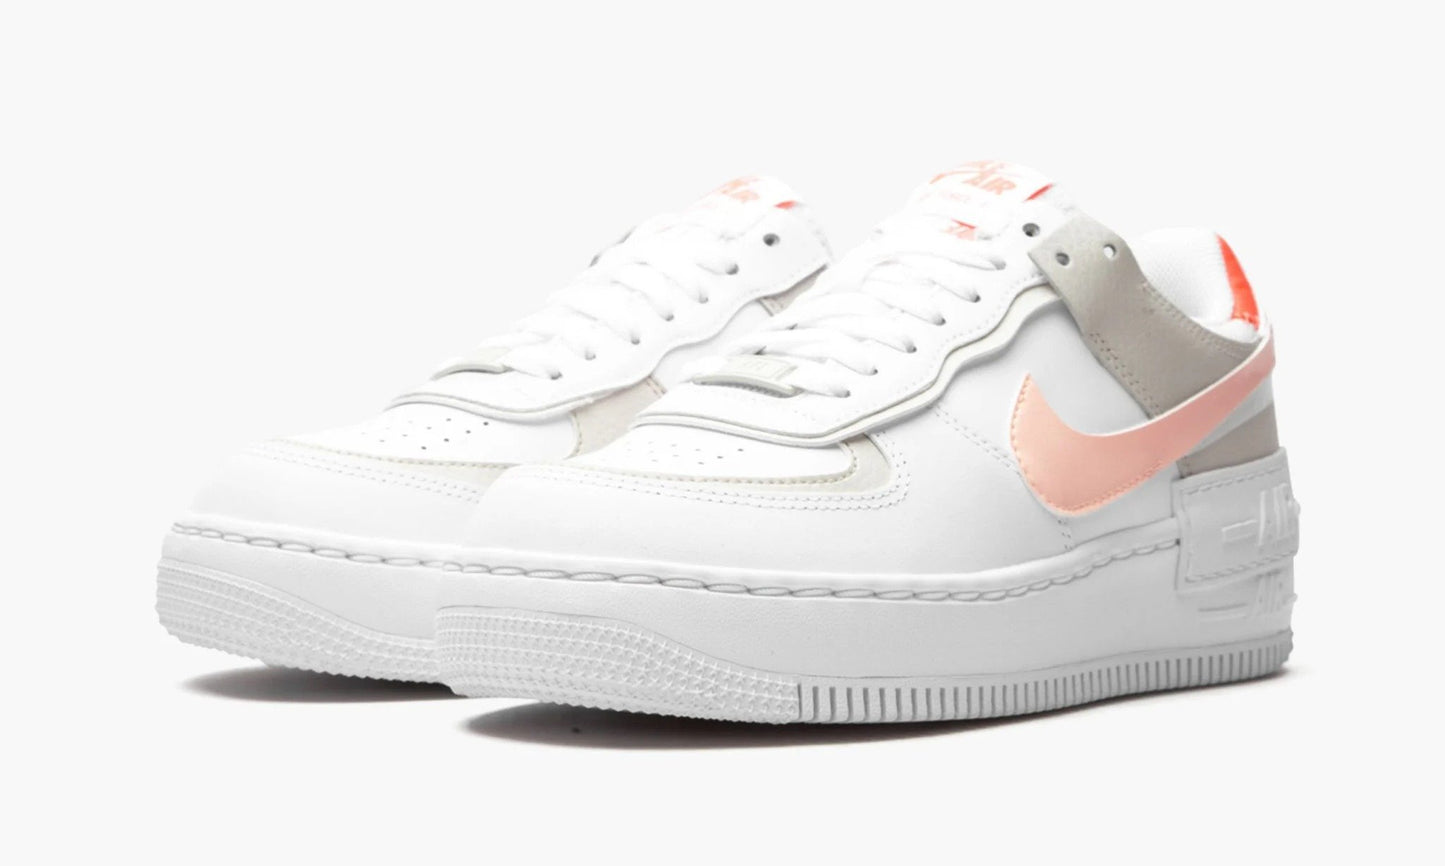 Force 1 Low Shadow WMNS “Crimson Tint”